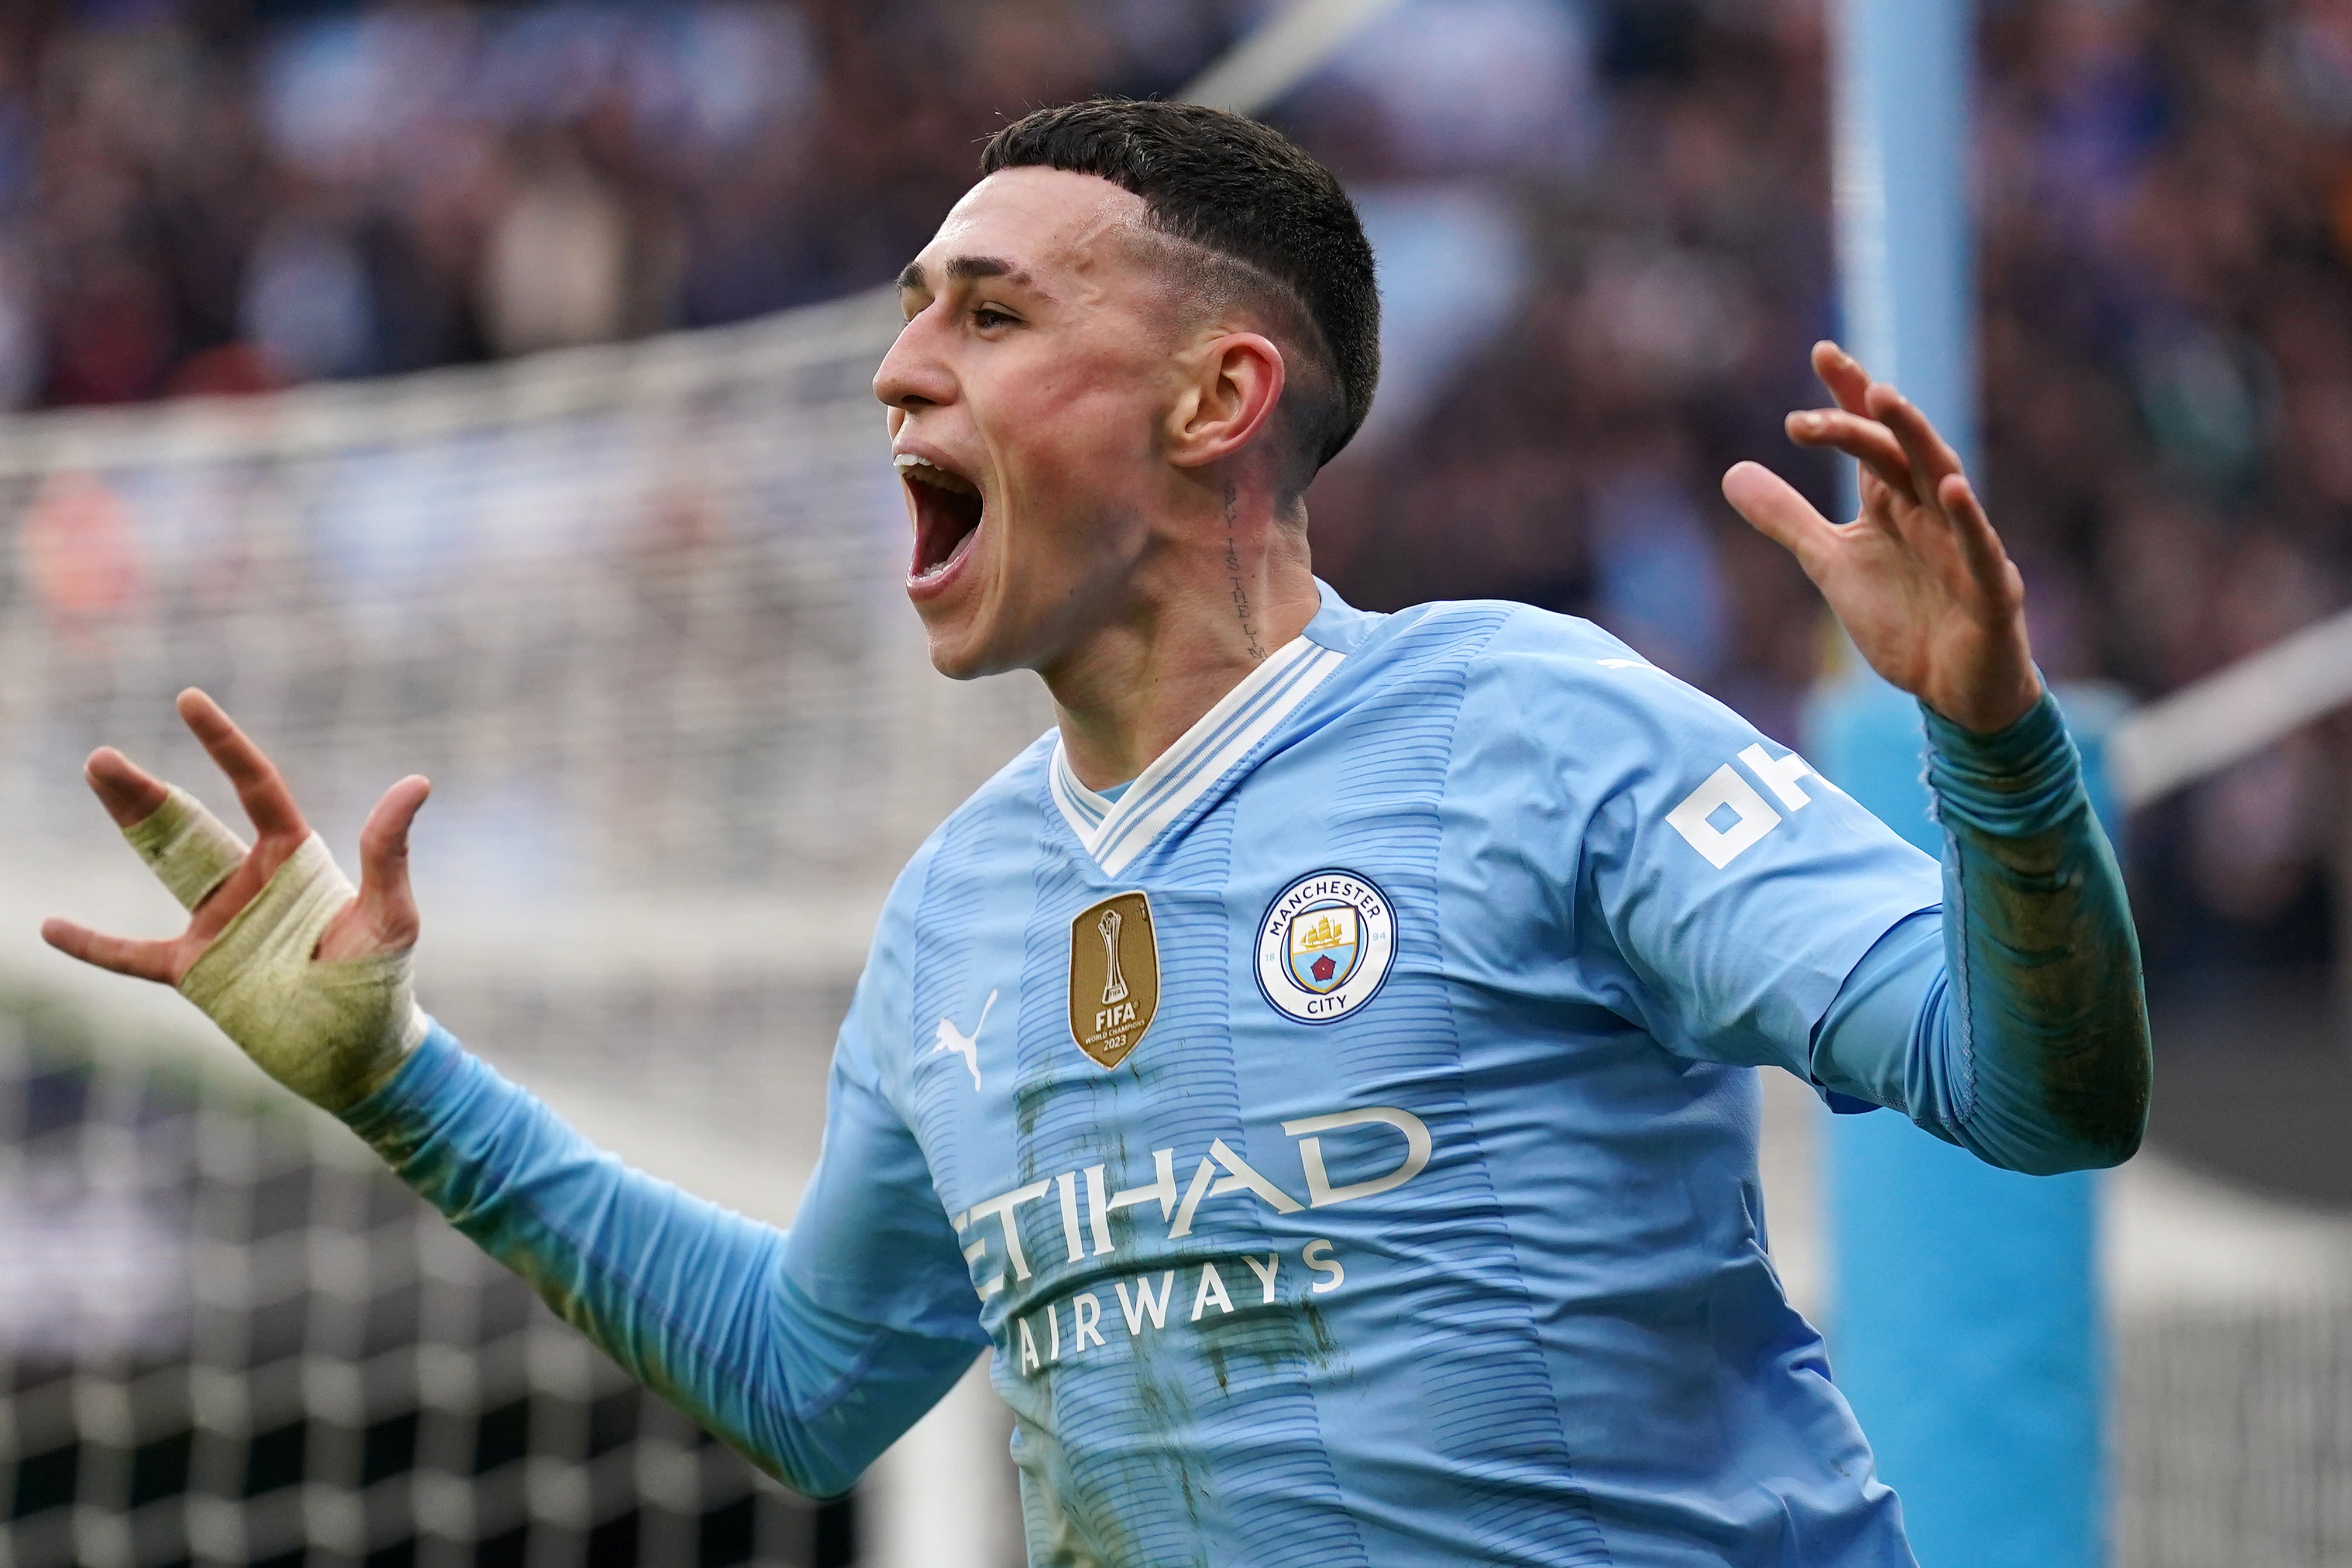 Phil Foden scored twice to overturn a 1-0 deficit for Man City